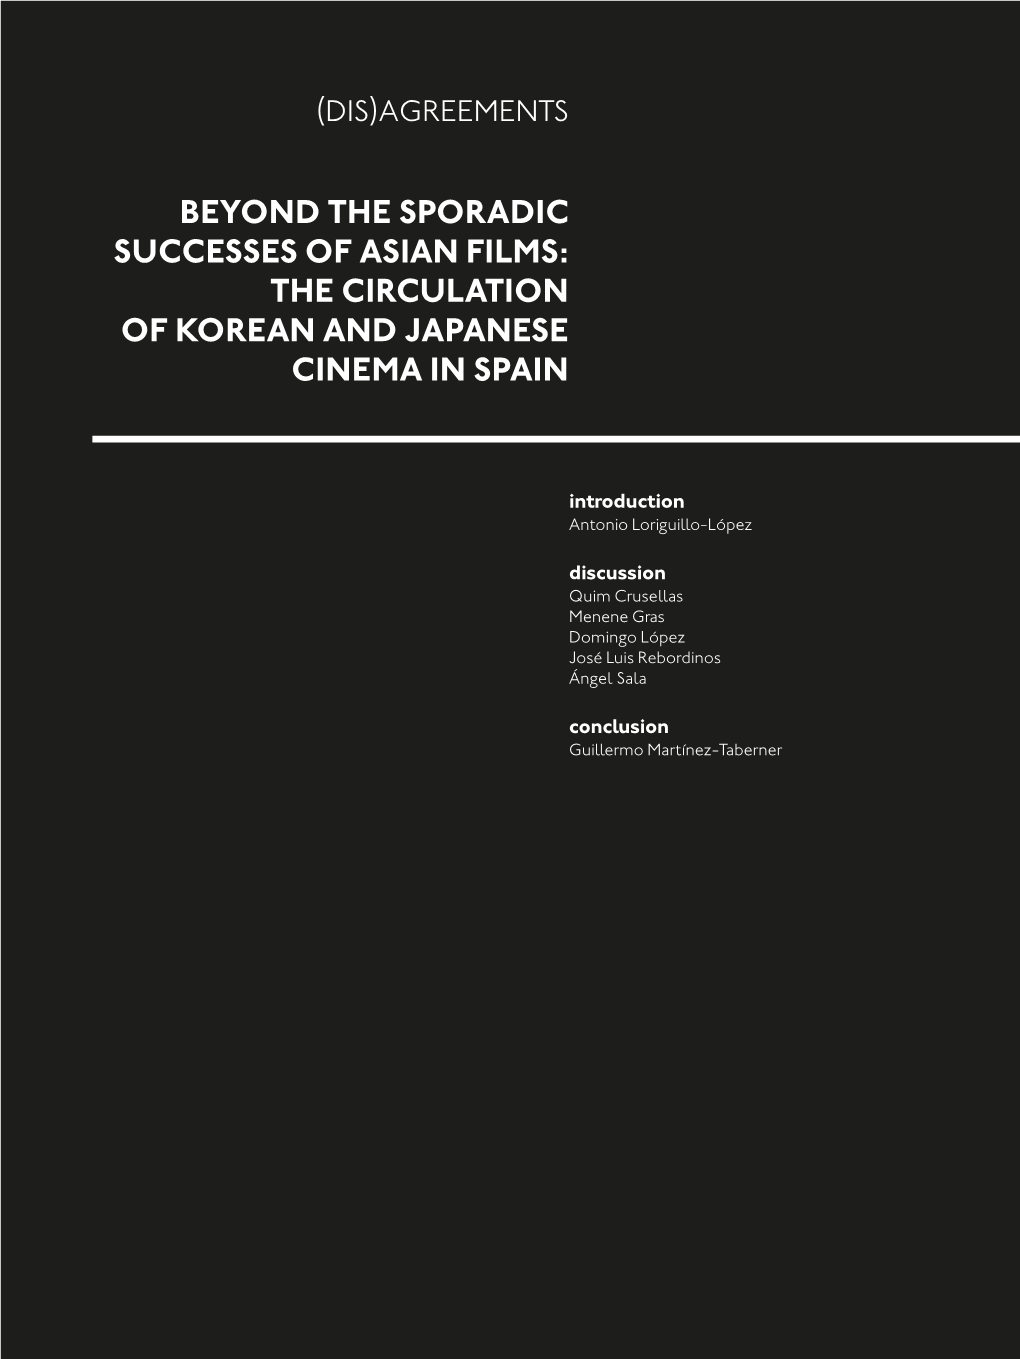 The Circulation of Korean and Japanese Cinema in Spain